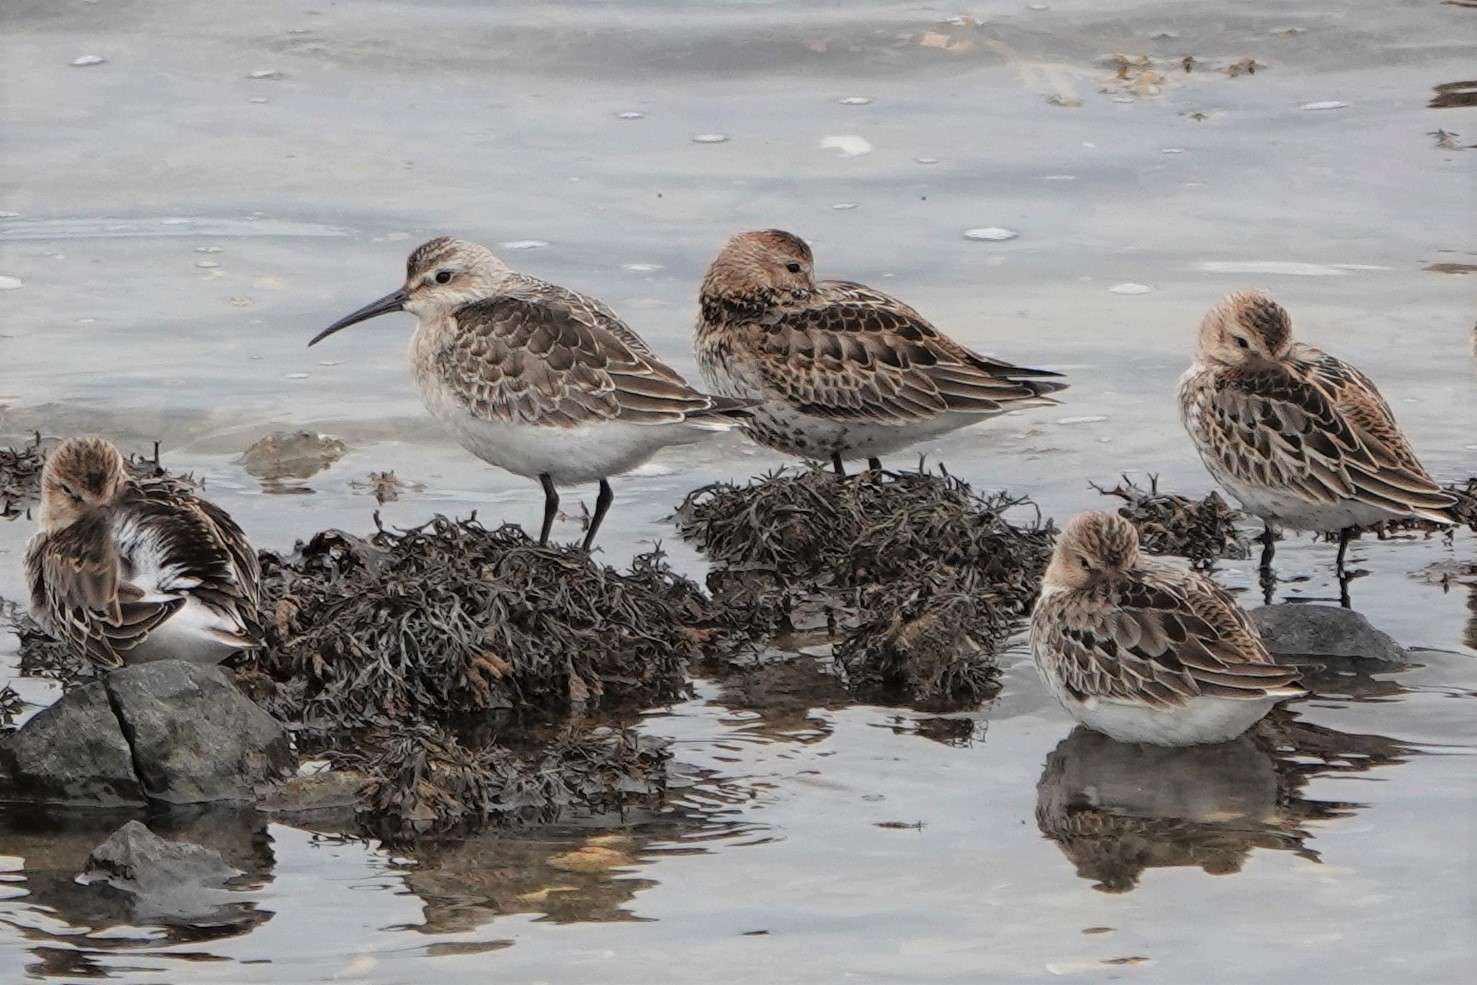 Curlew Sandpiper by Paul Howrihane at Home Farm Marsh